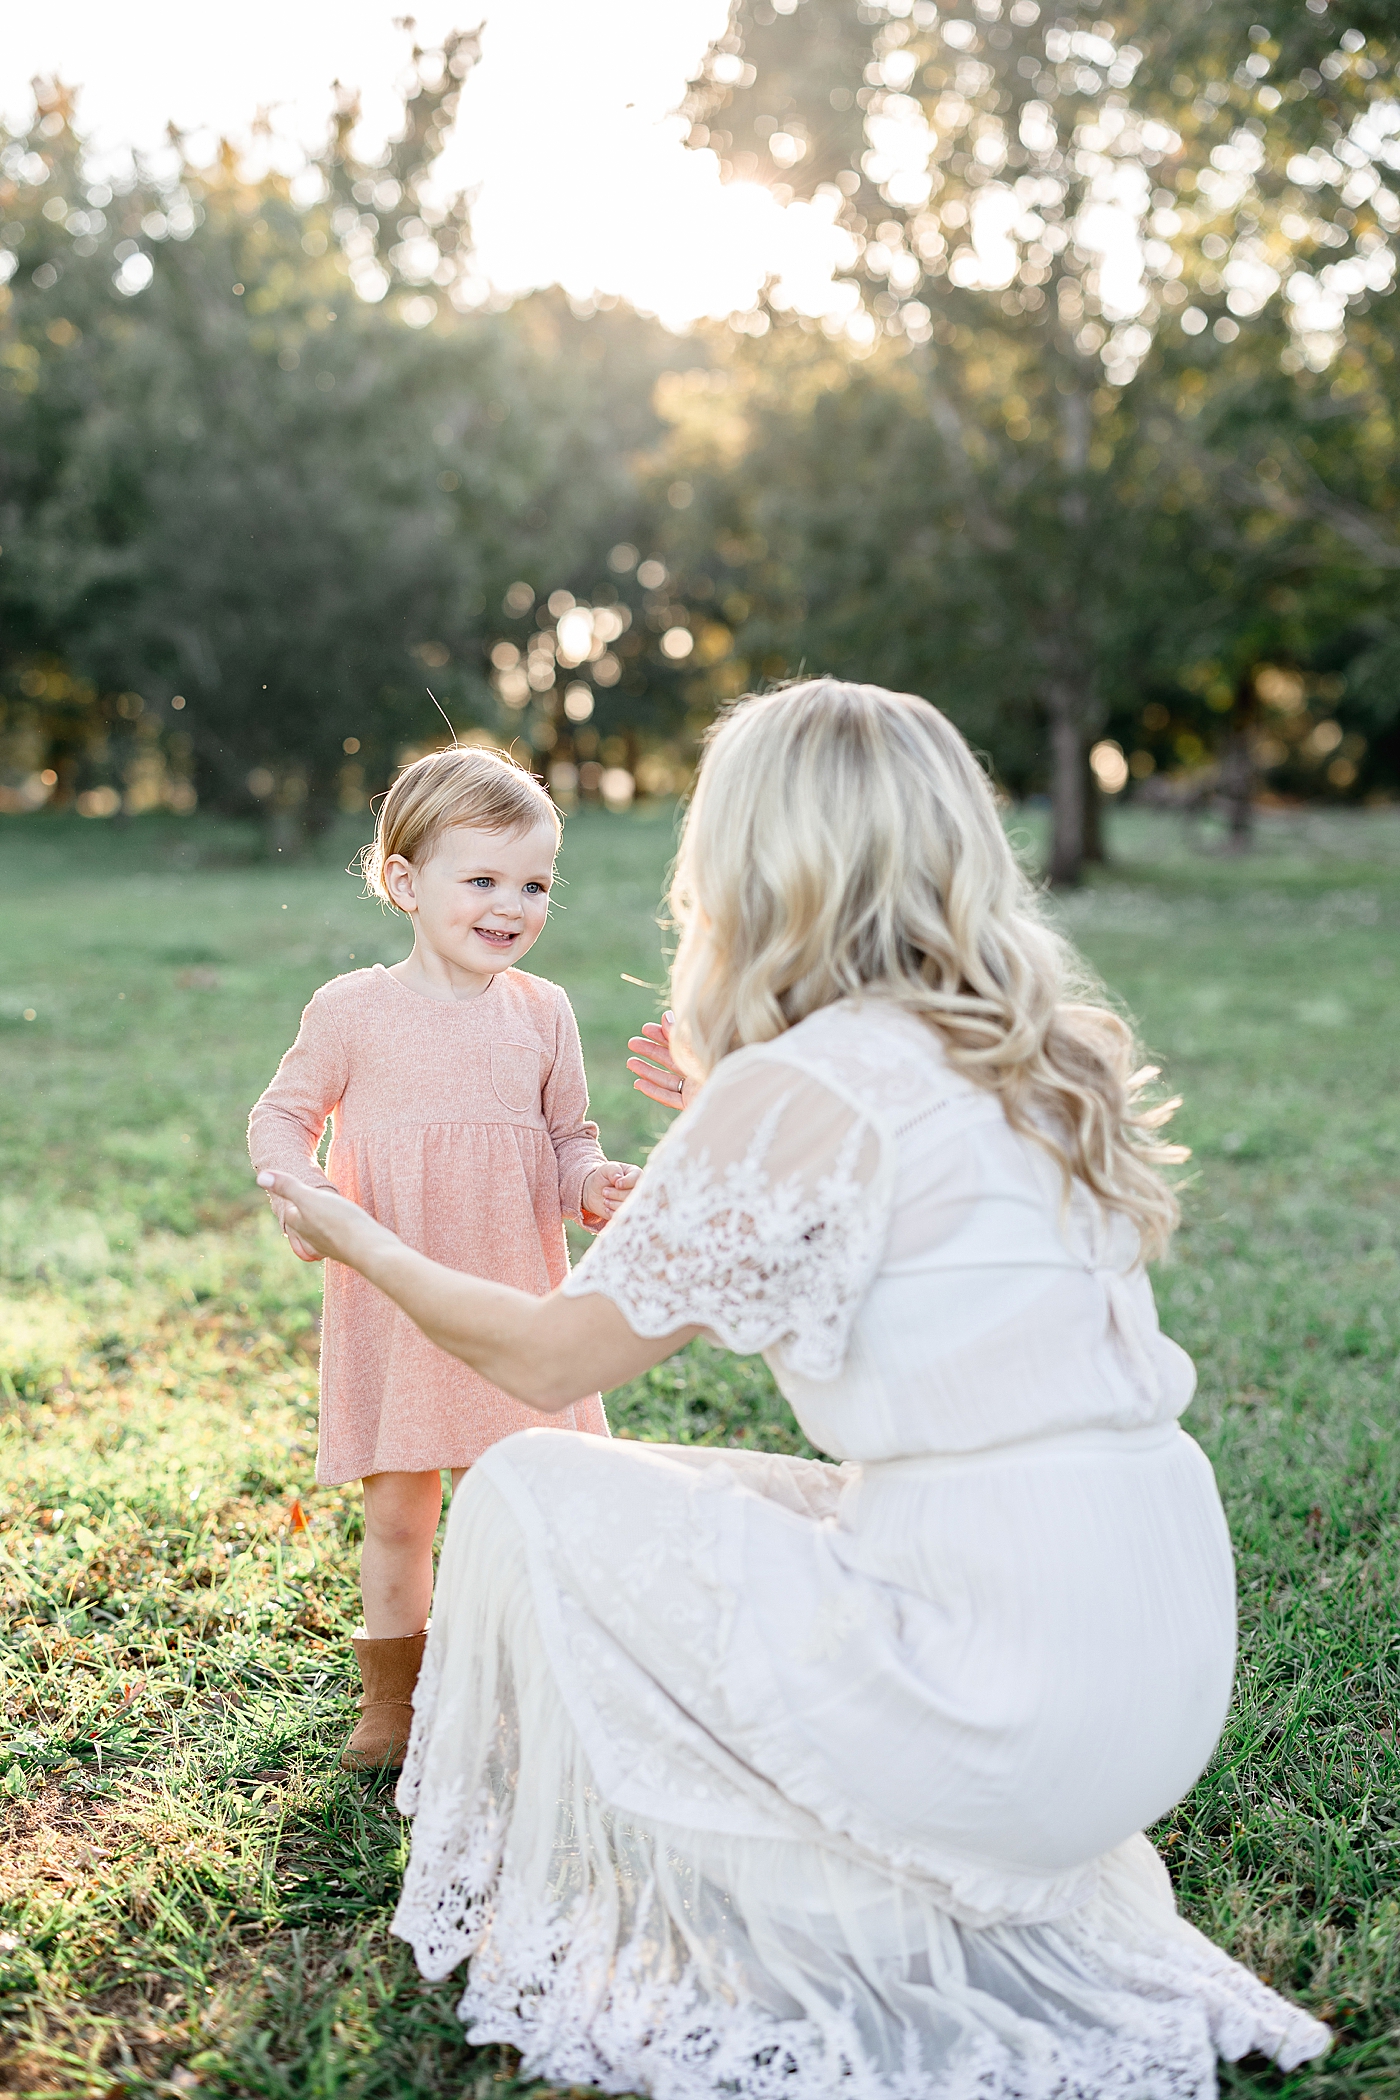 Mom bending down looking at her little girl. Photo by Brittany Elise Photography.